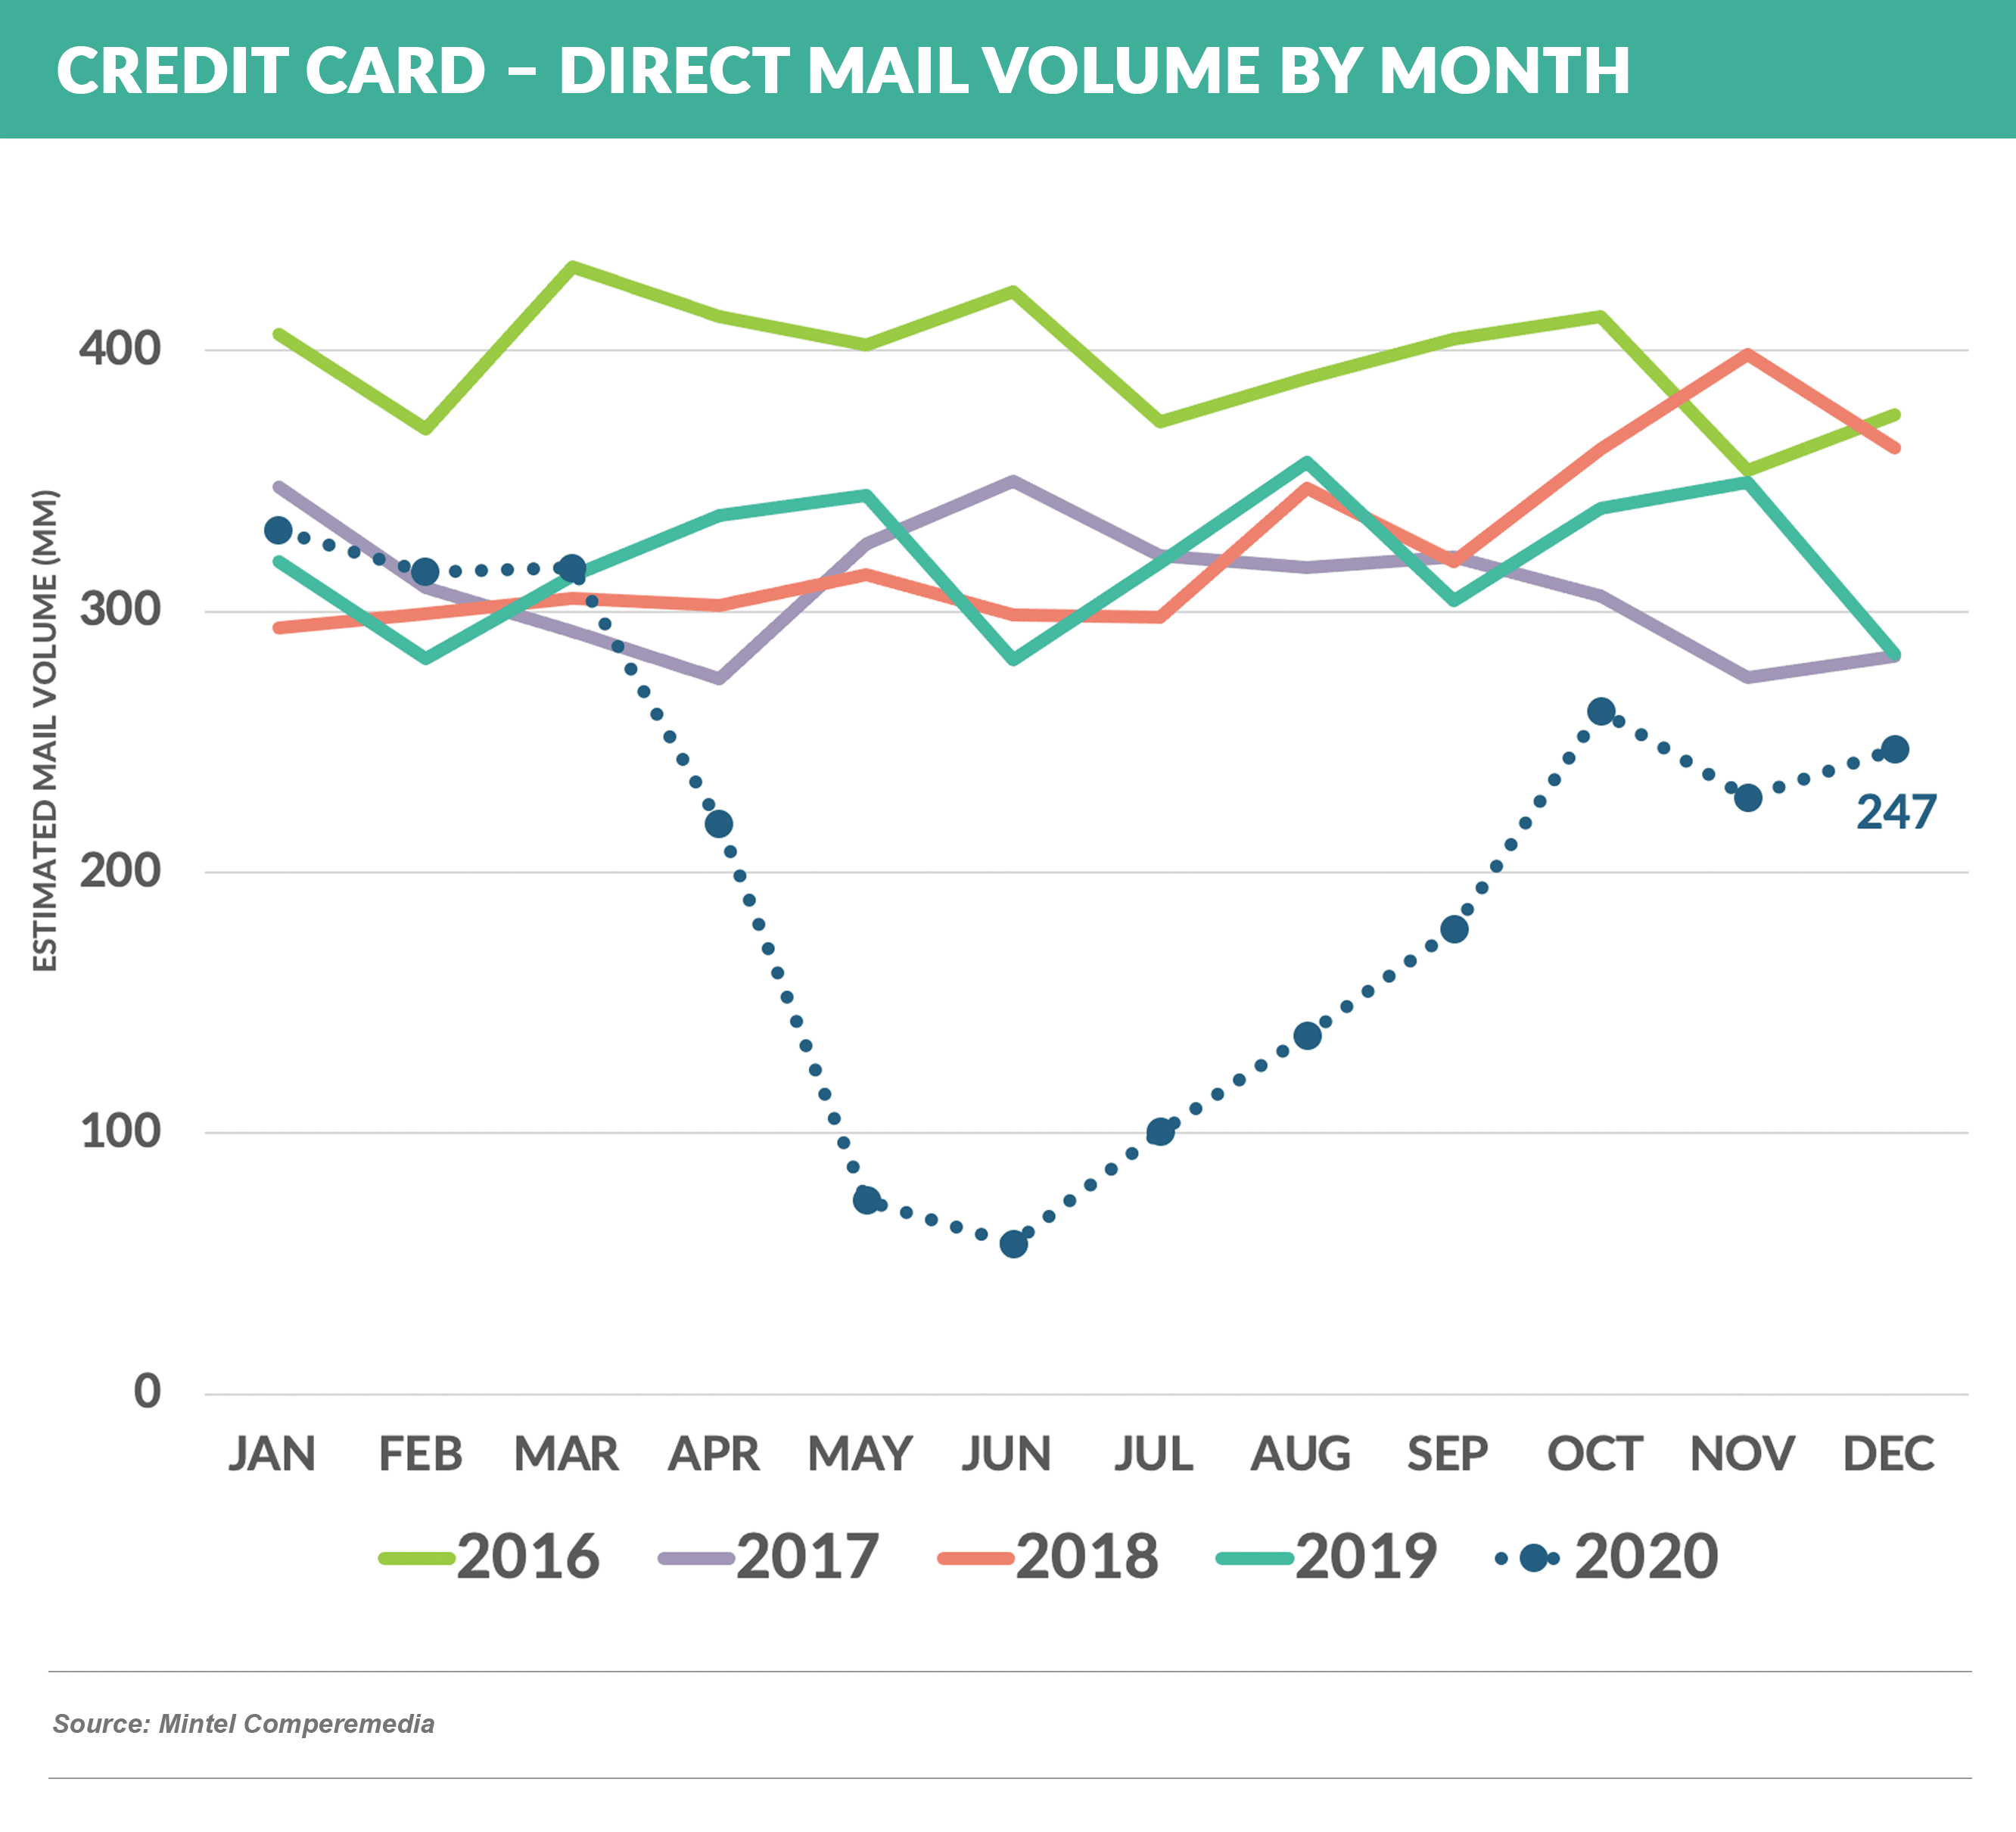 Credit Card – Direct Mail Volume by Month 20210206